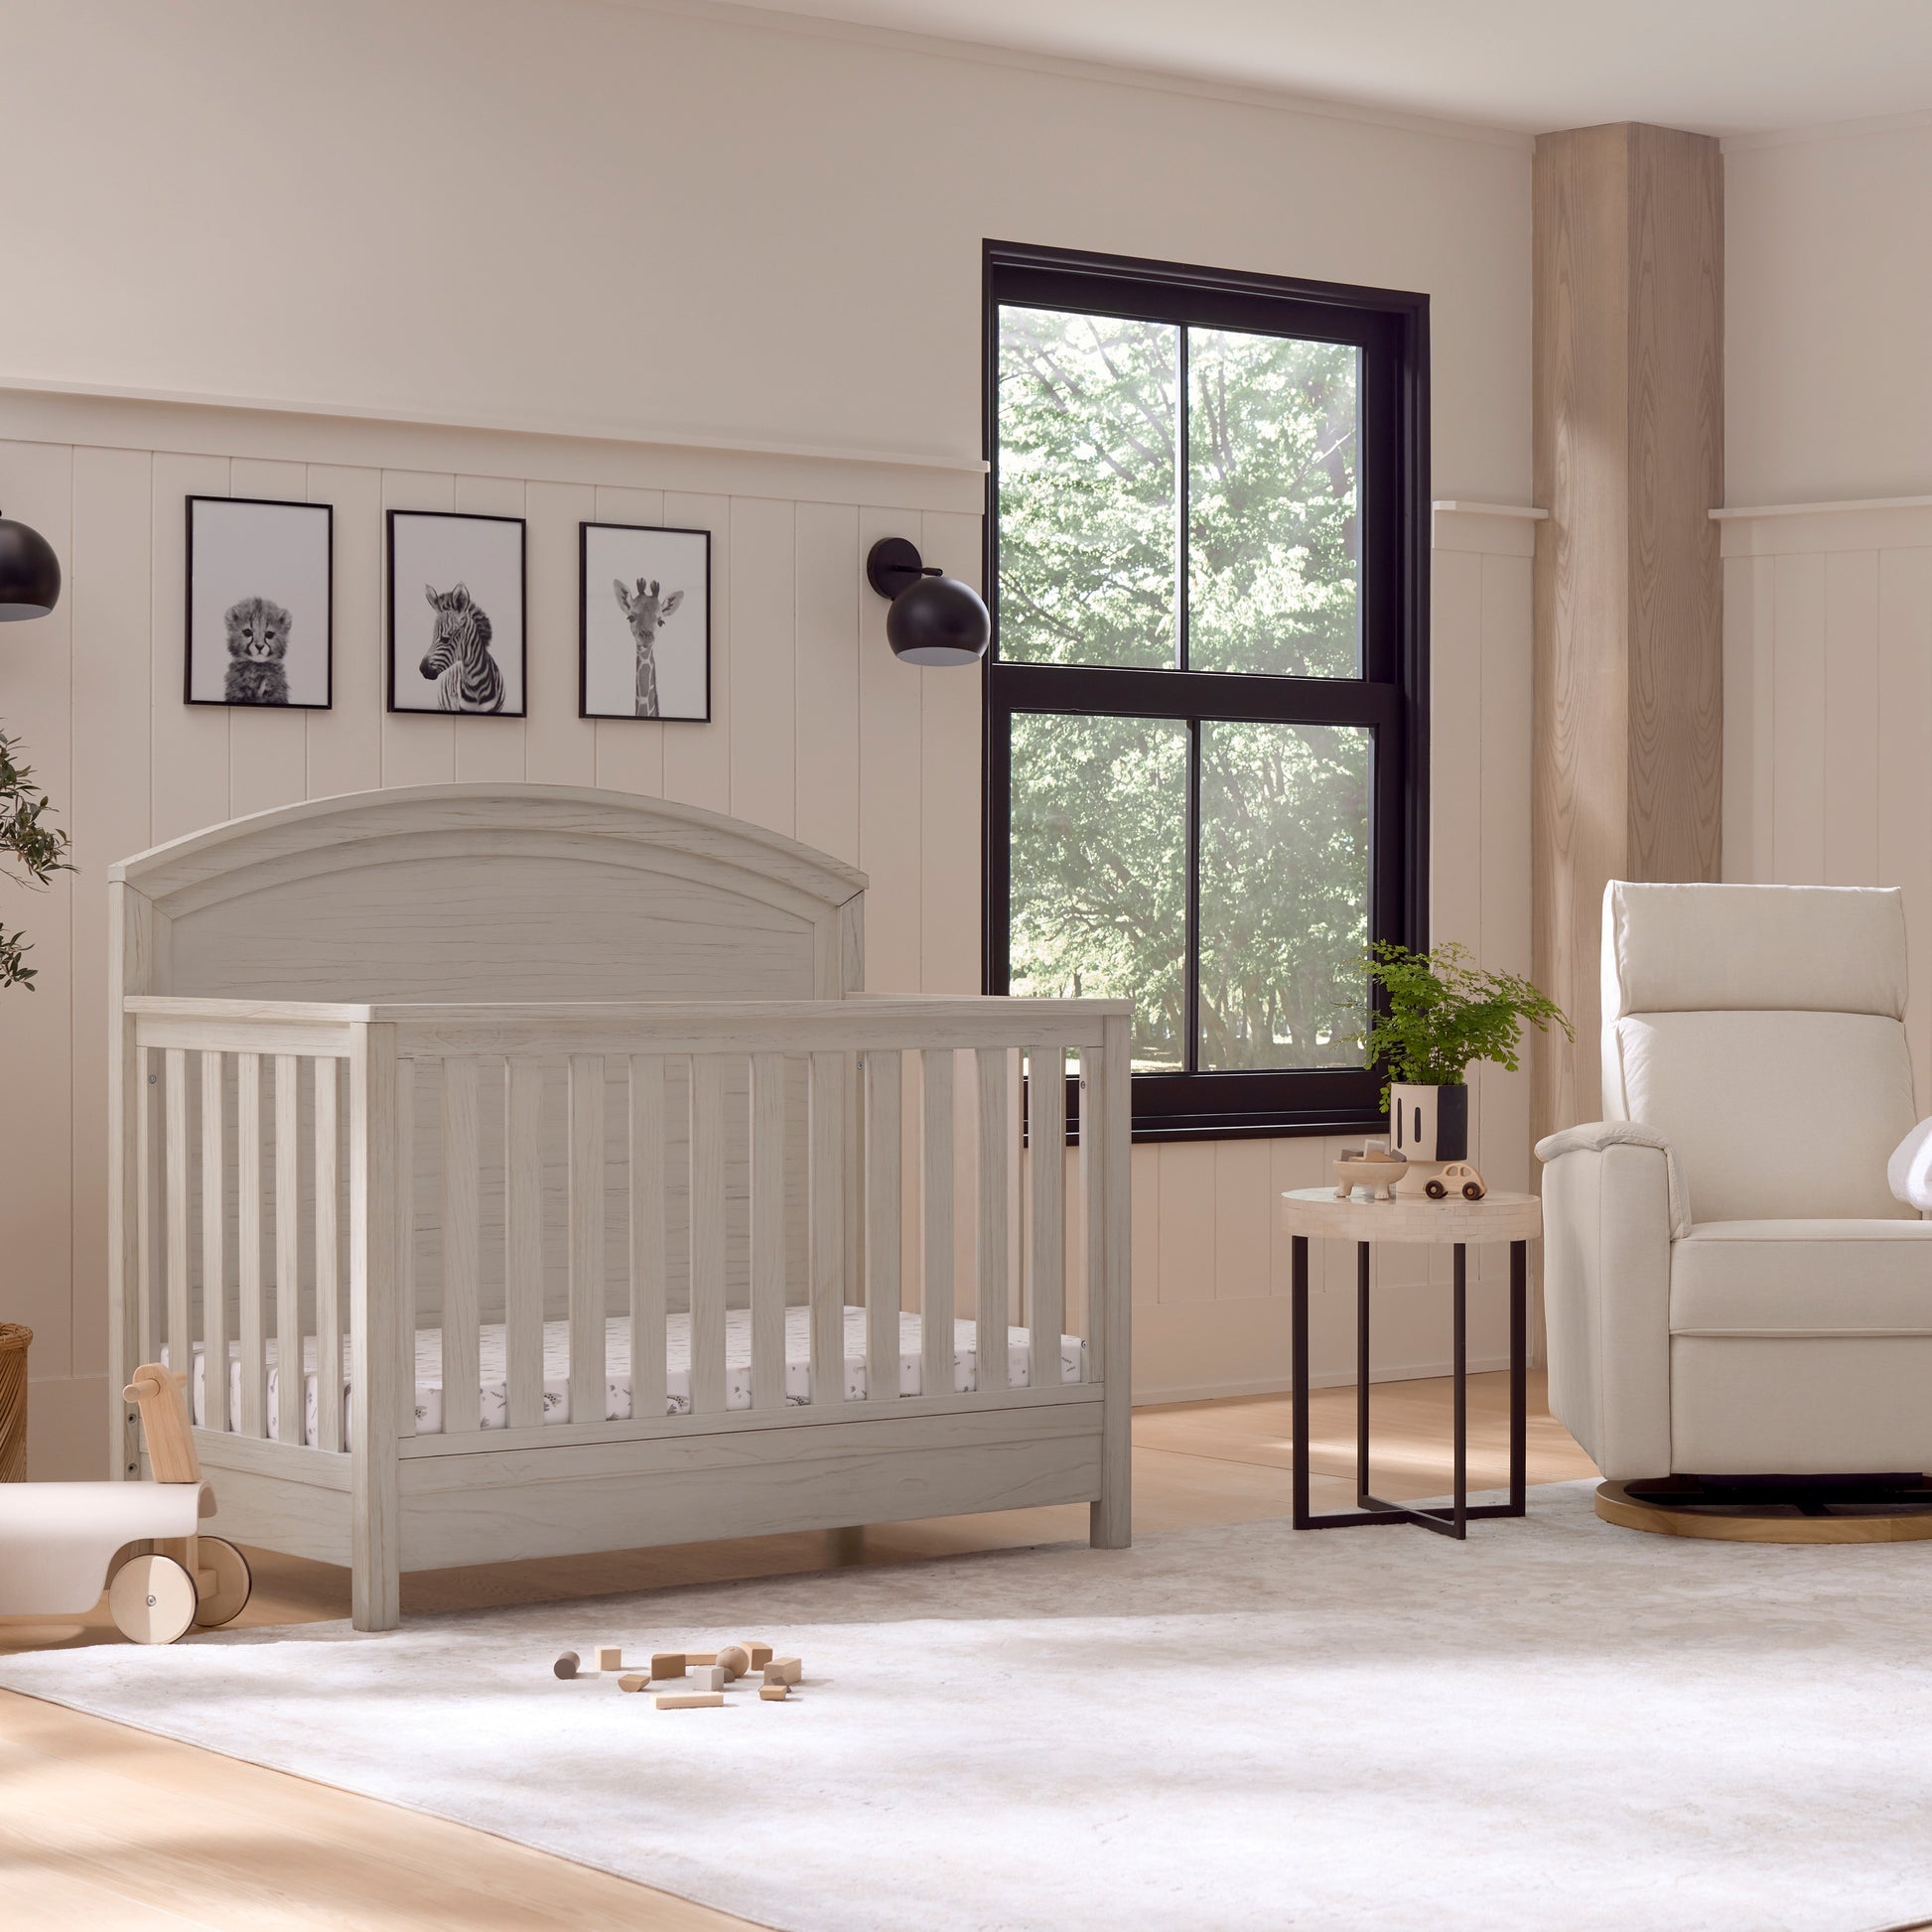 Hemsted 4-in-1 Convertible Crib - White Driftwood - Twinkle Twinkle Little One